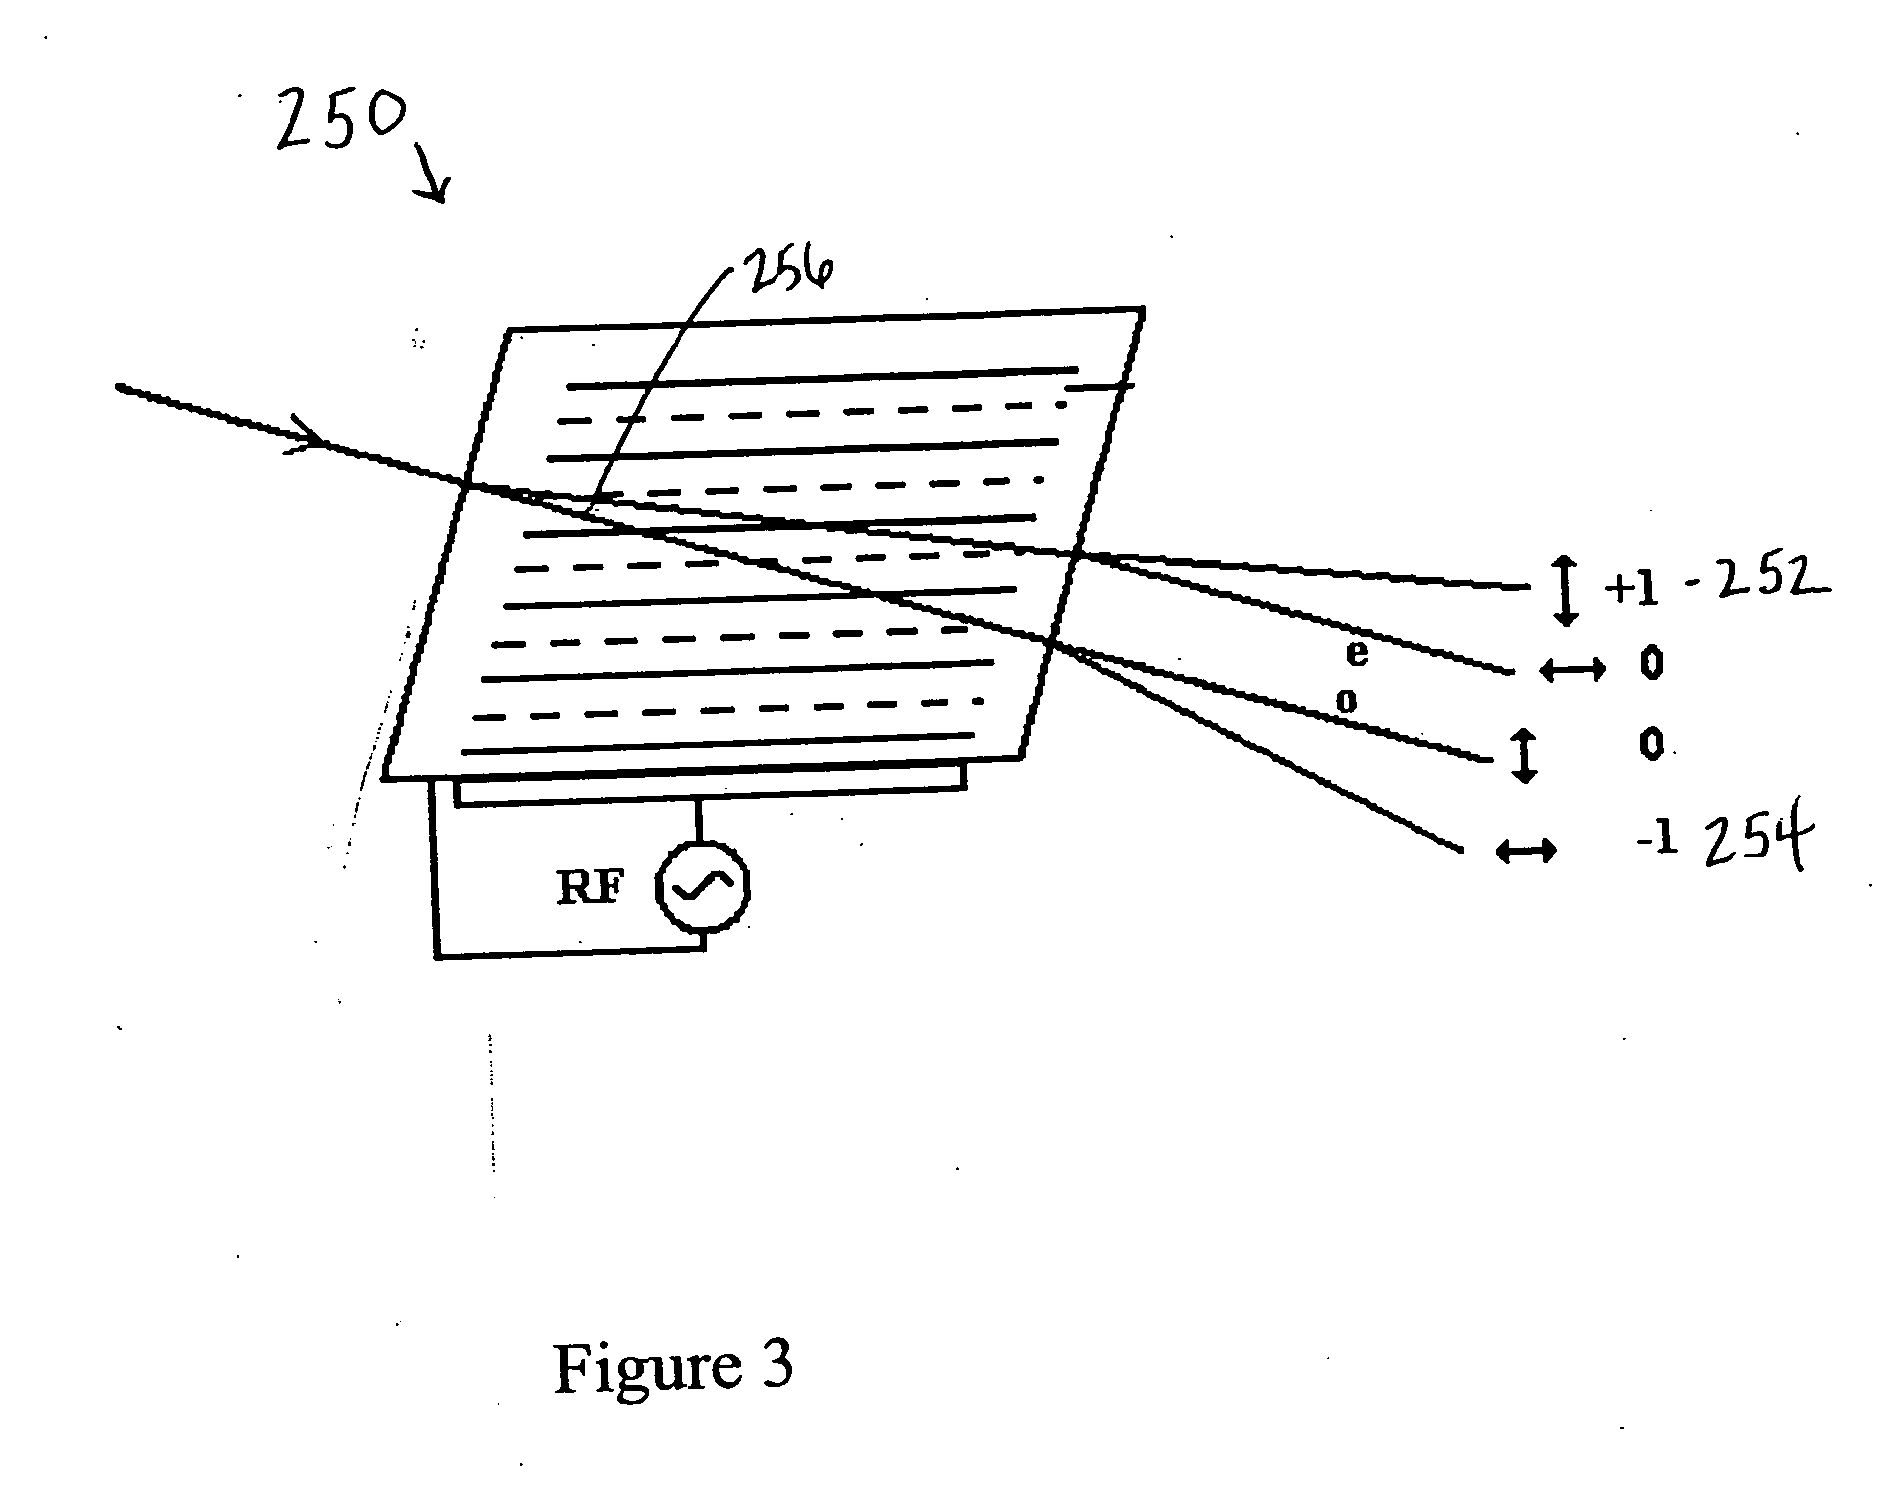 System and method for rapid detection and characterization of bacterial colonies using forward light scattering